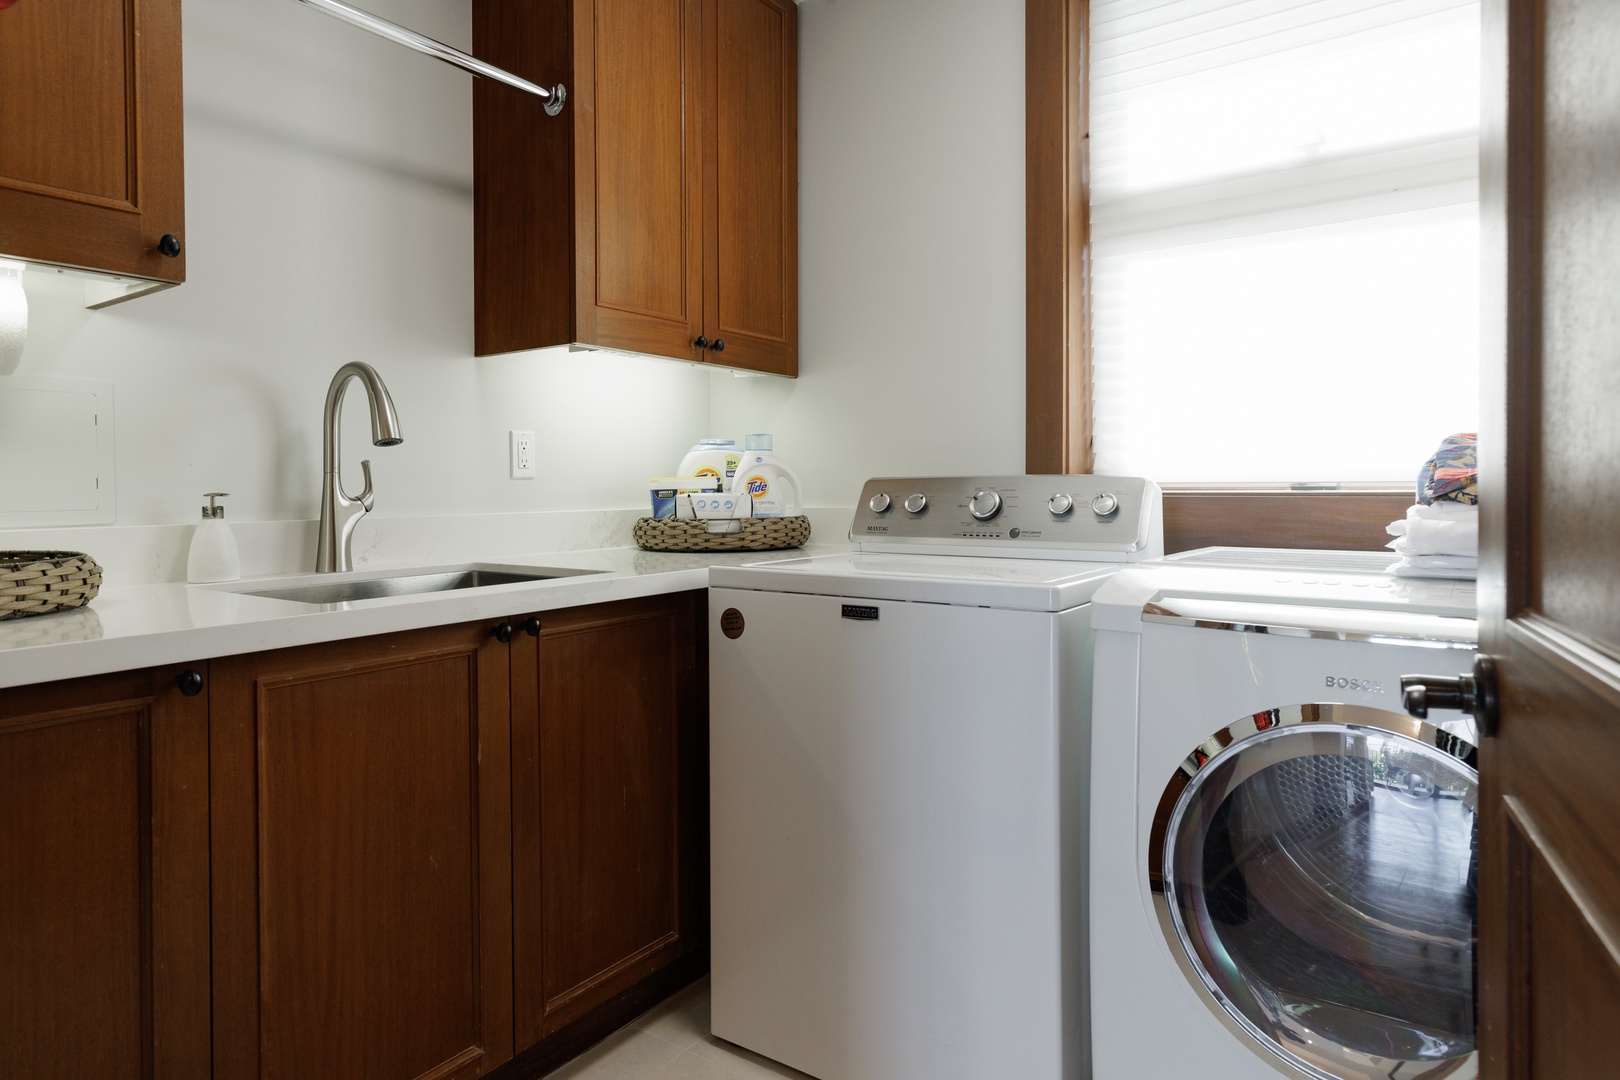 Kailua Kona Vacation Rentals, Fairway Villa 104A - An in-unit laundry area with a washer/dryer.